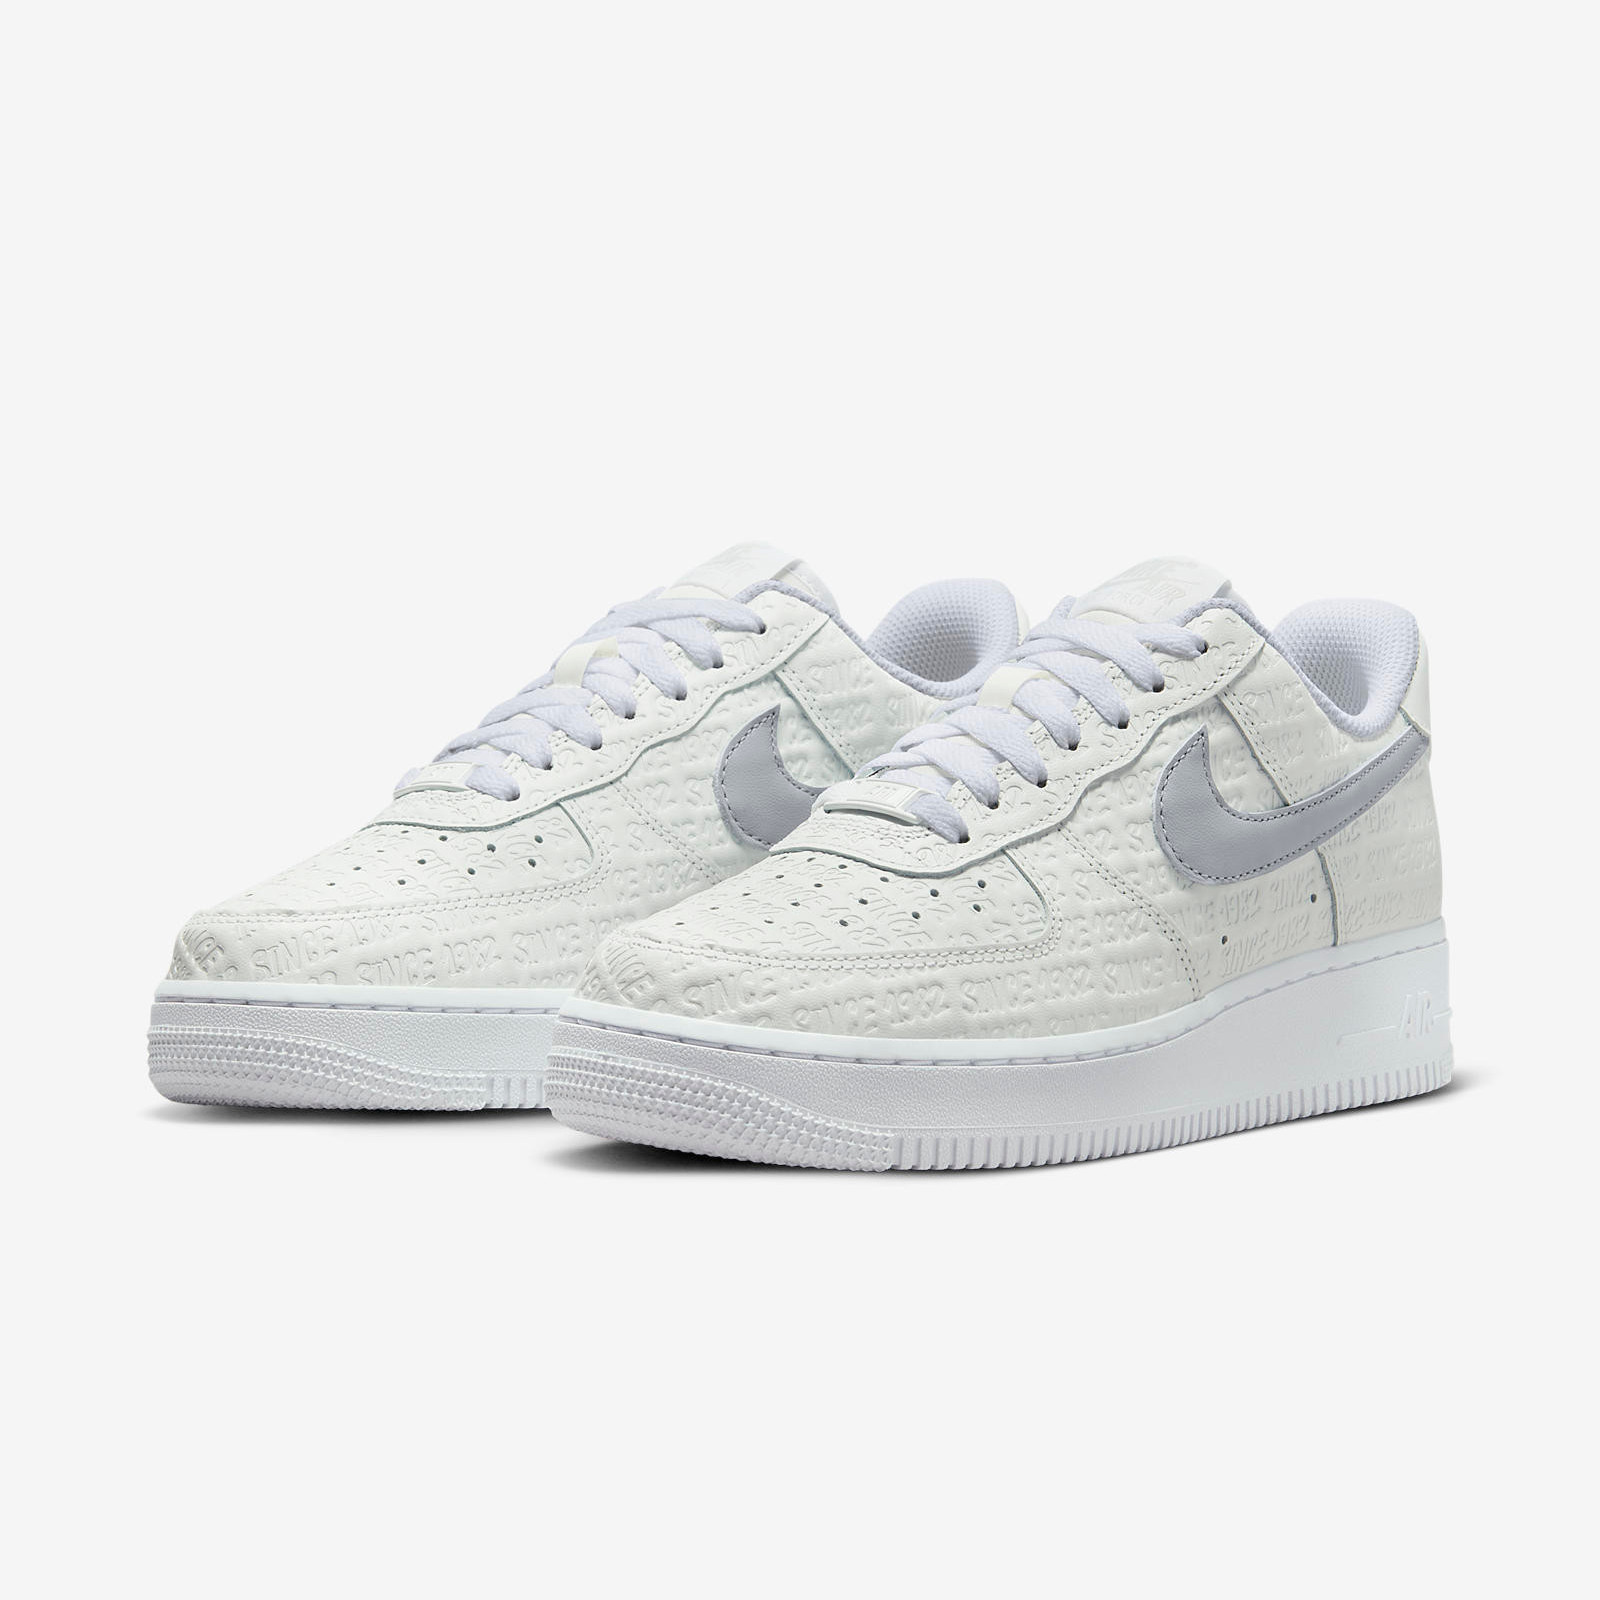 Nike Air Force 1 Low
« Summit White »